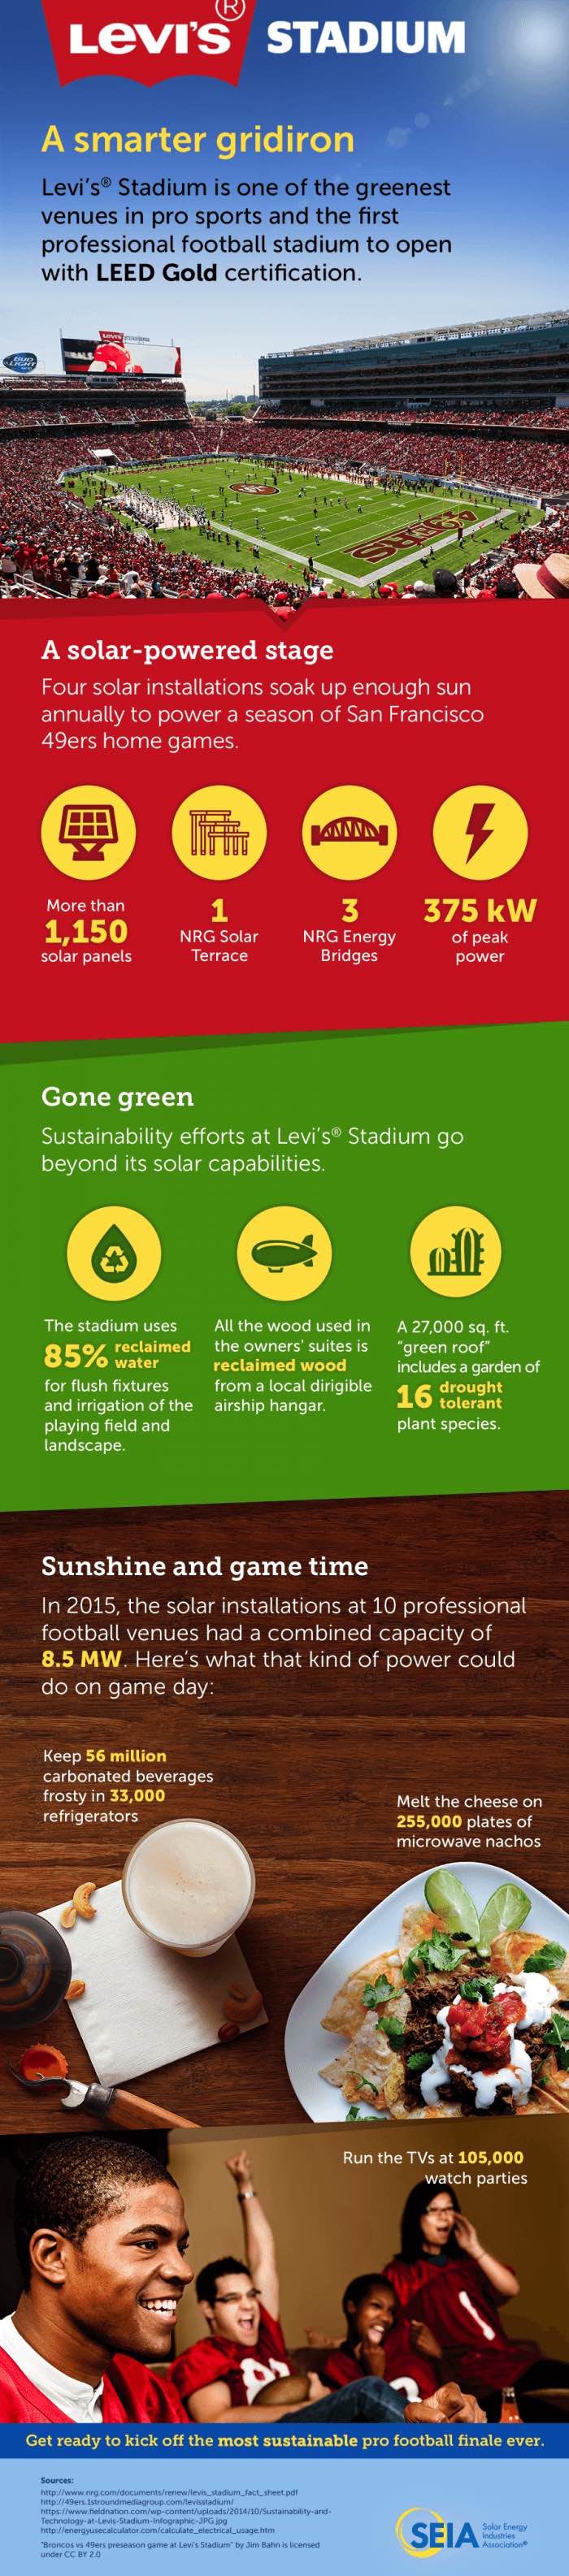 Fun facts about solar and NFL stadiums.